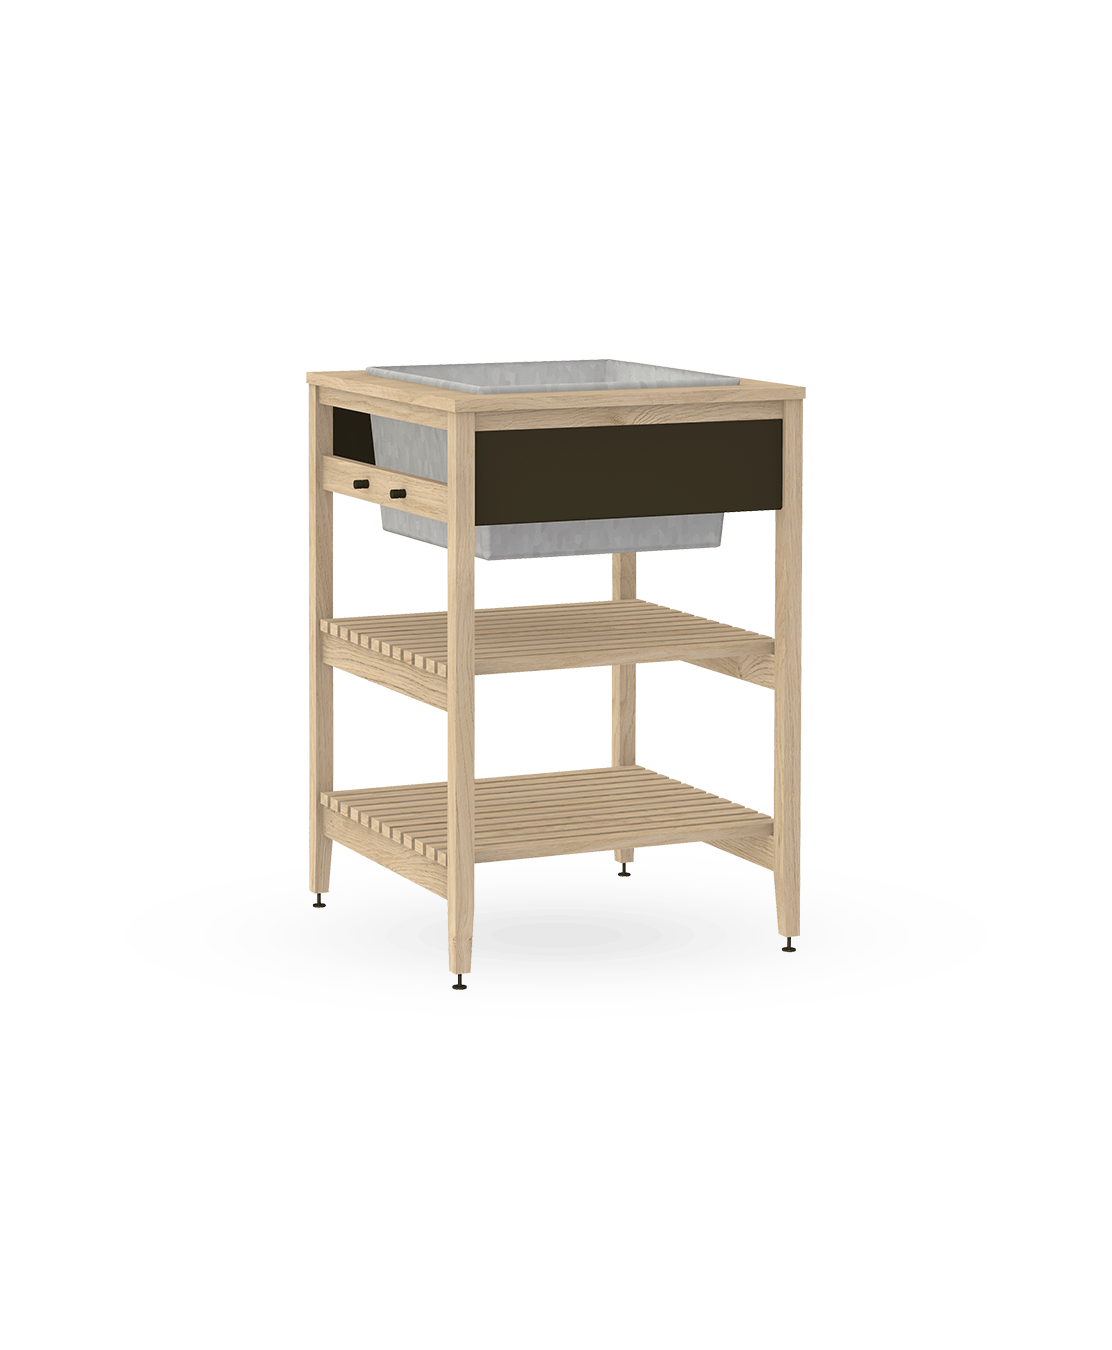 Coquo modular indoor outdoor planter in natural oak with two shelves. 